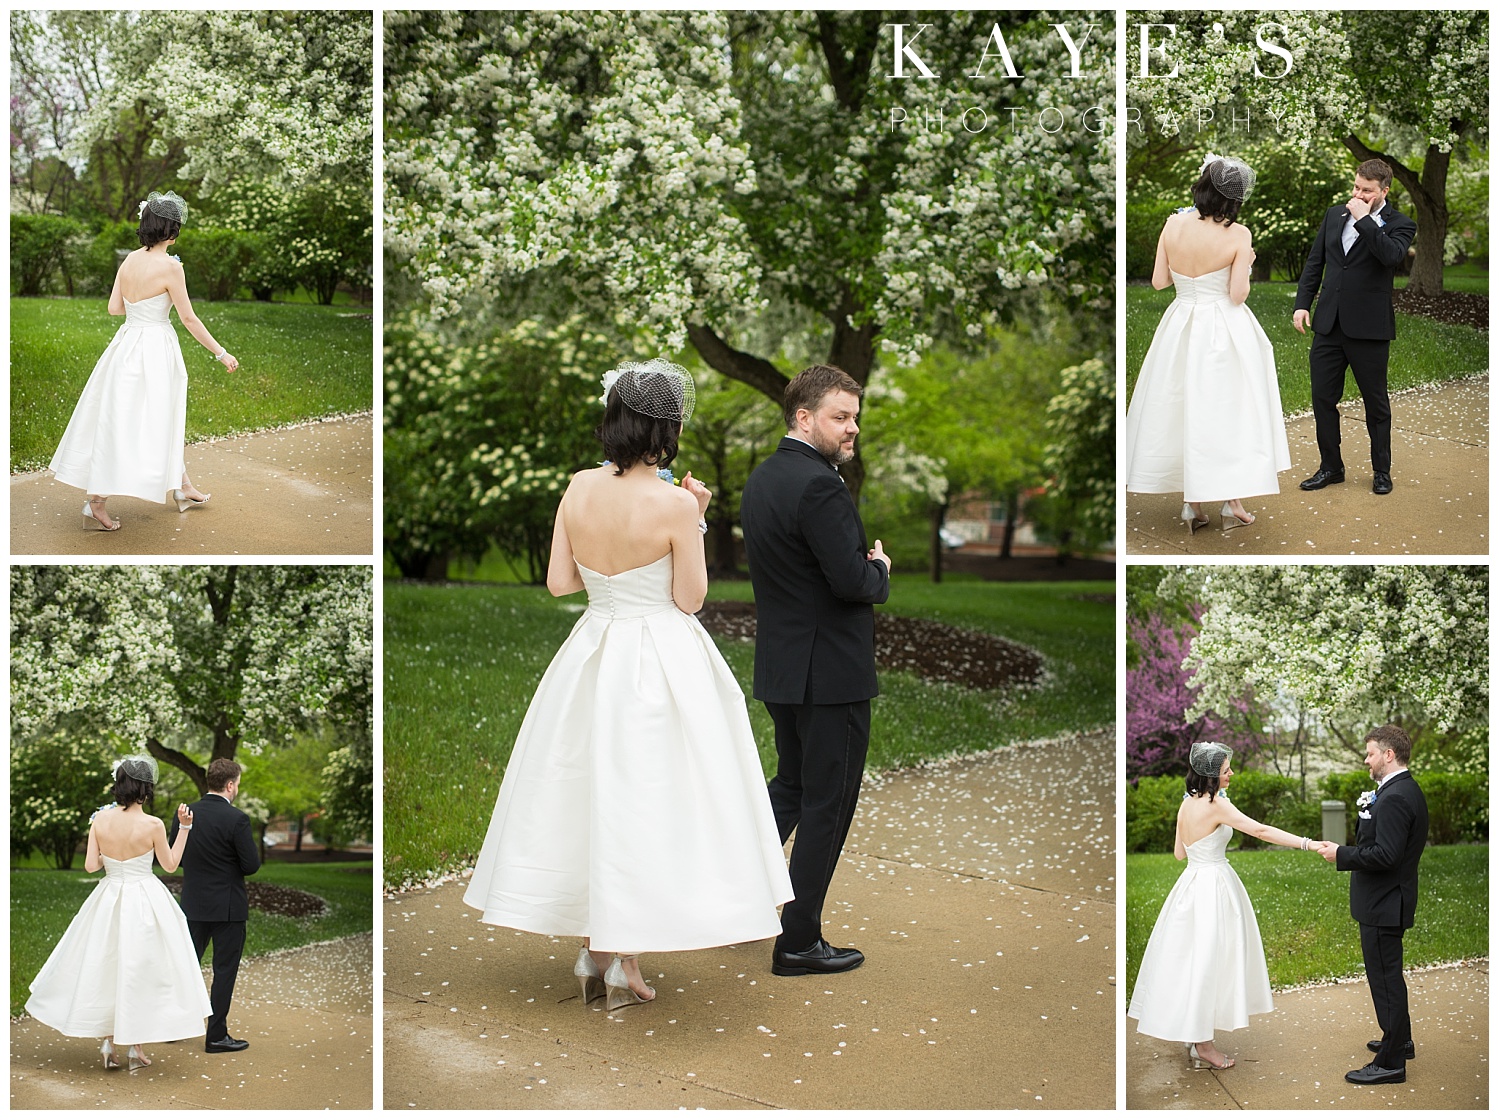 first look in front of flowering trees in flint, michigan before wedding ceremony